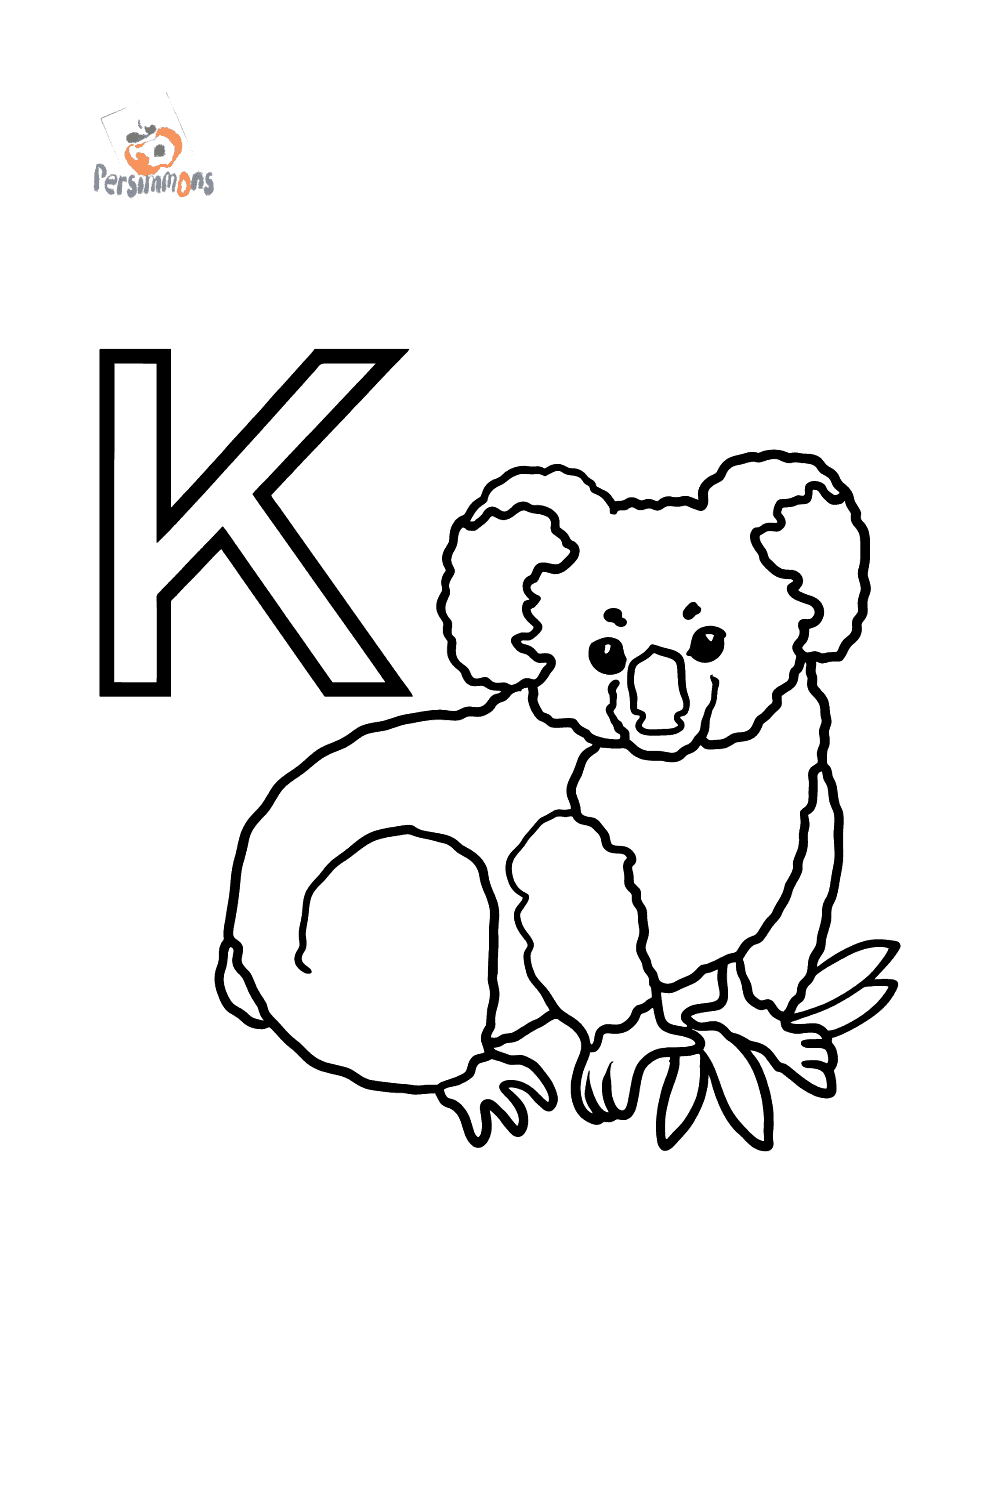 Spanish Letter K coloring pages ♥ Print and Online Free!